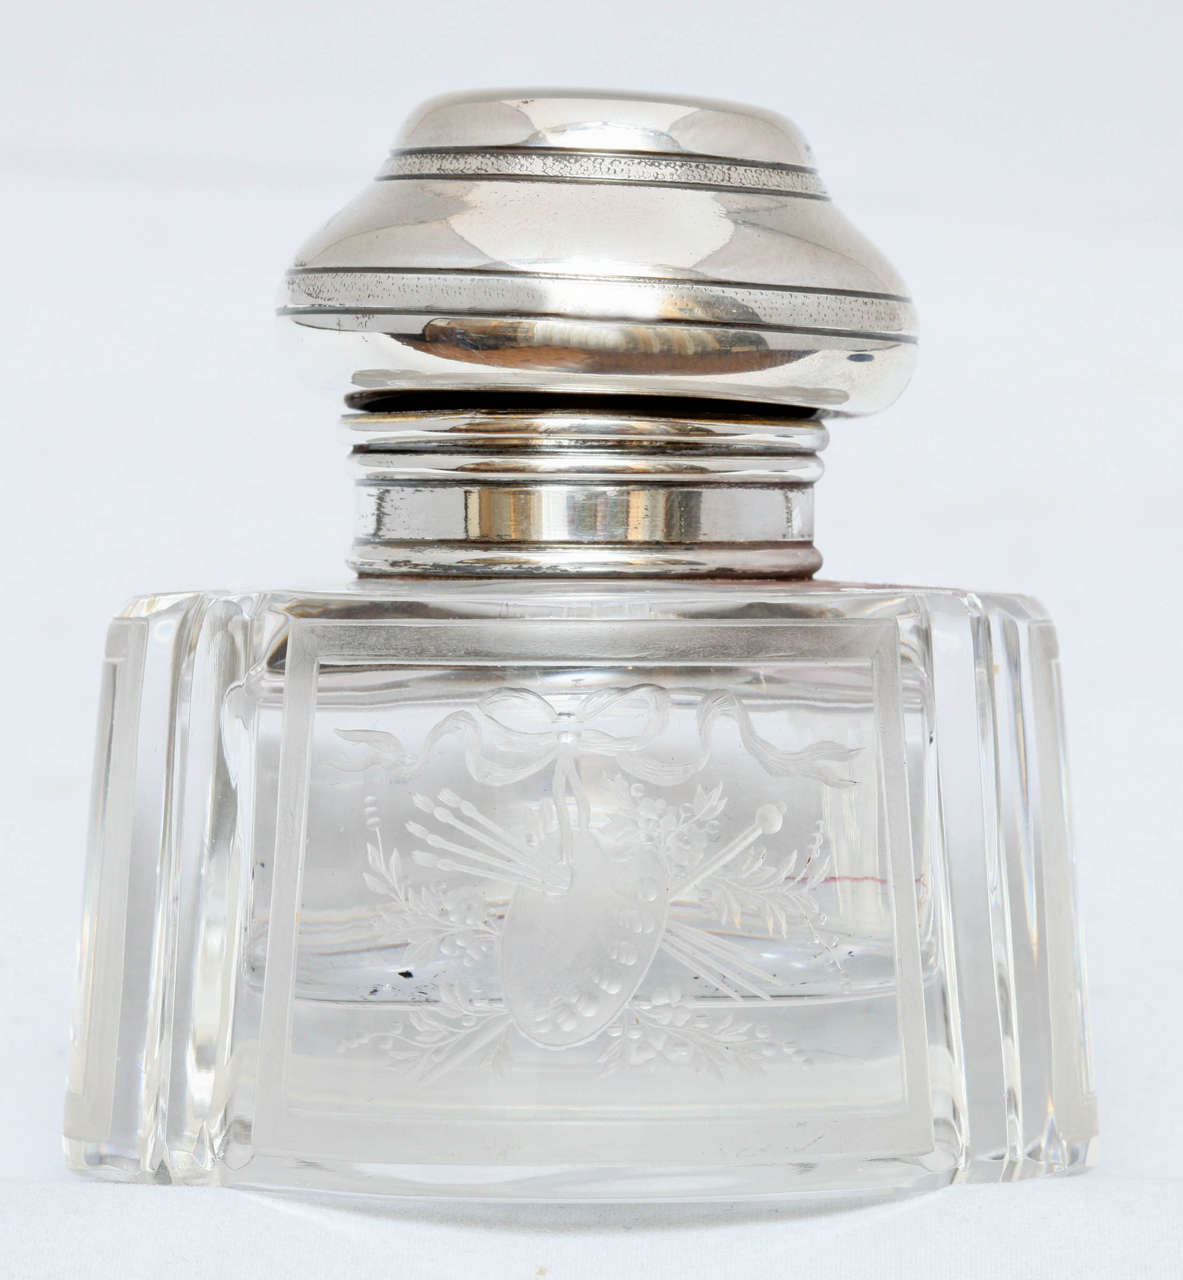 Sterling silver-mounted, etched crystal inkwell, The Gorham Corp., Providence, Rhode Island, year-marked for 1895. Crystal is centrally etched with an artist's palette and paint brushes which are surrounded by flowers and a bow. Measures: 3 3/4